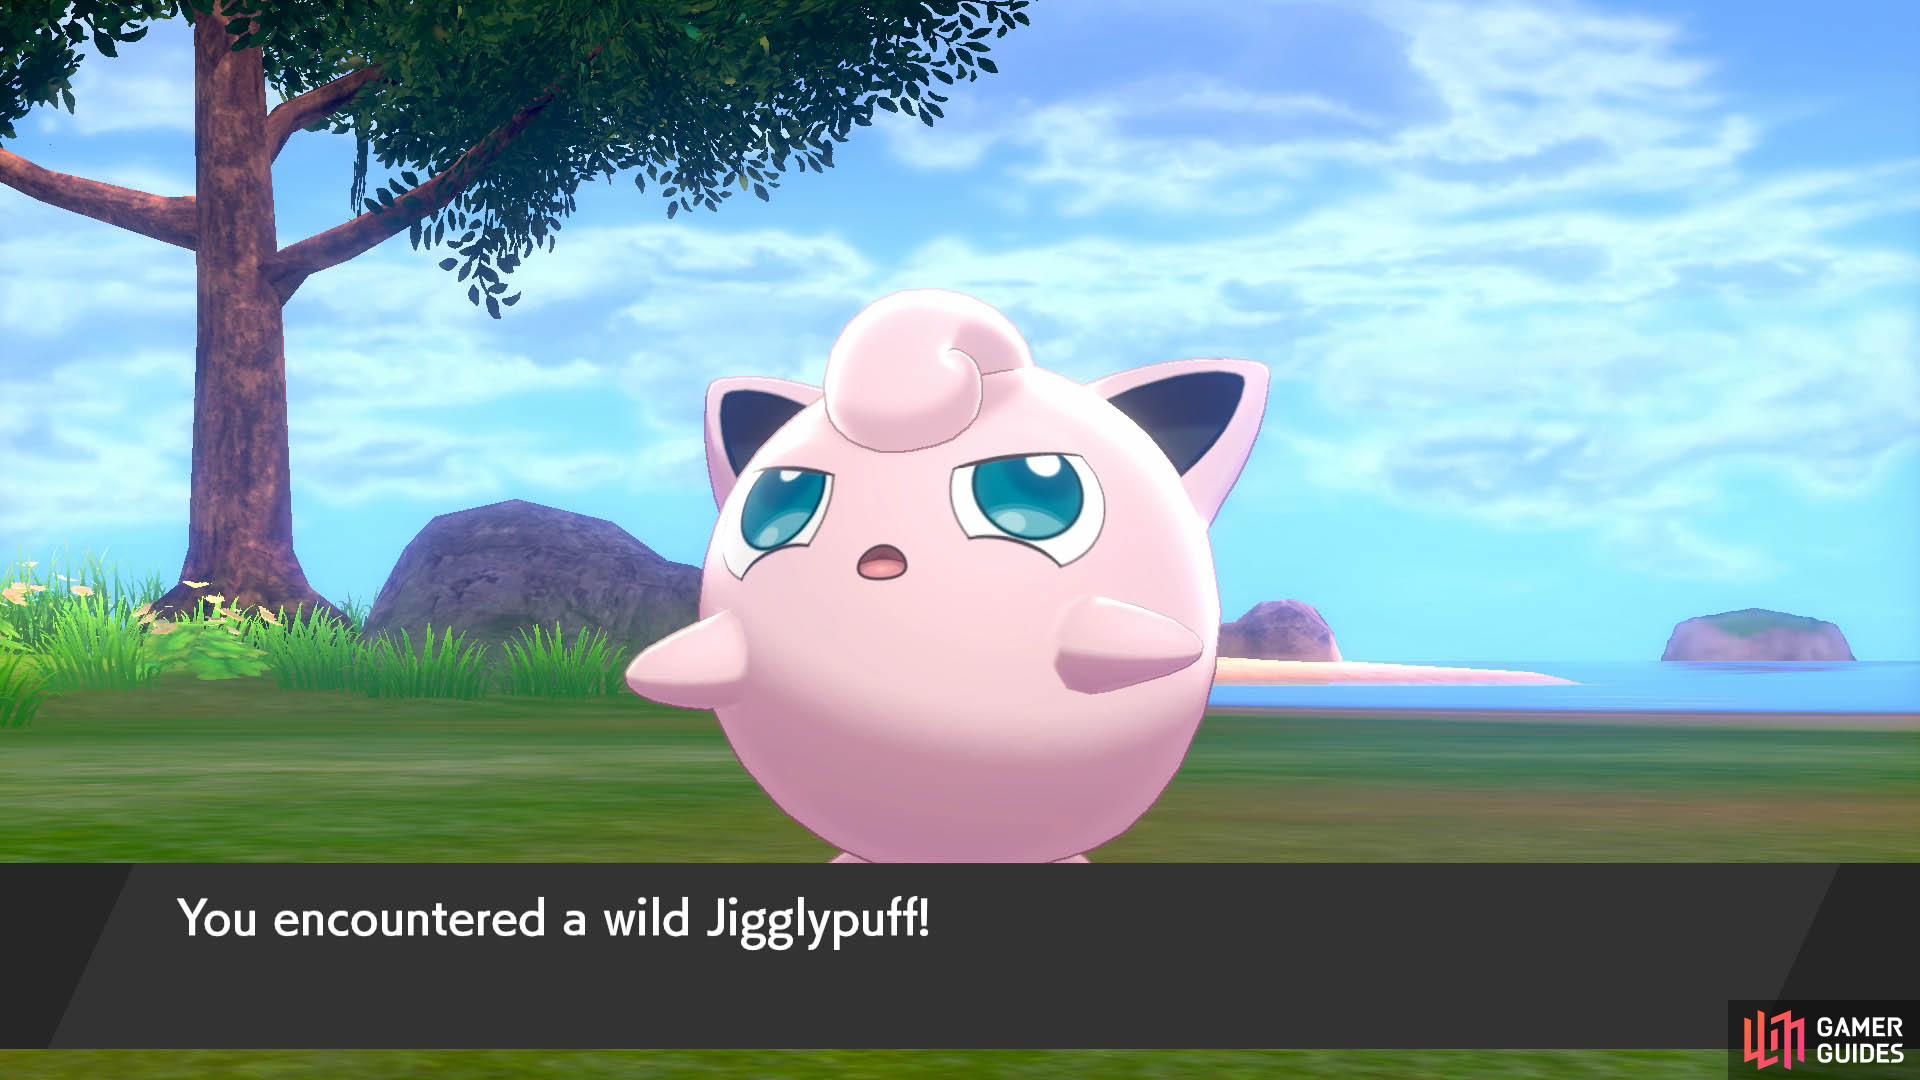 Don't worry, this Jigglypuff isn't carrying a microphone!